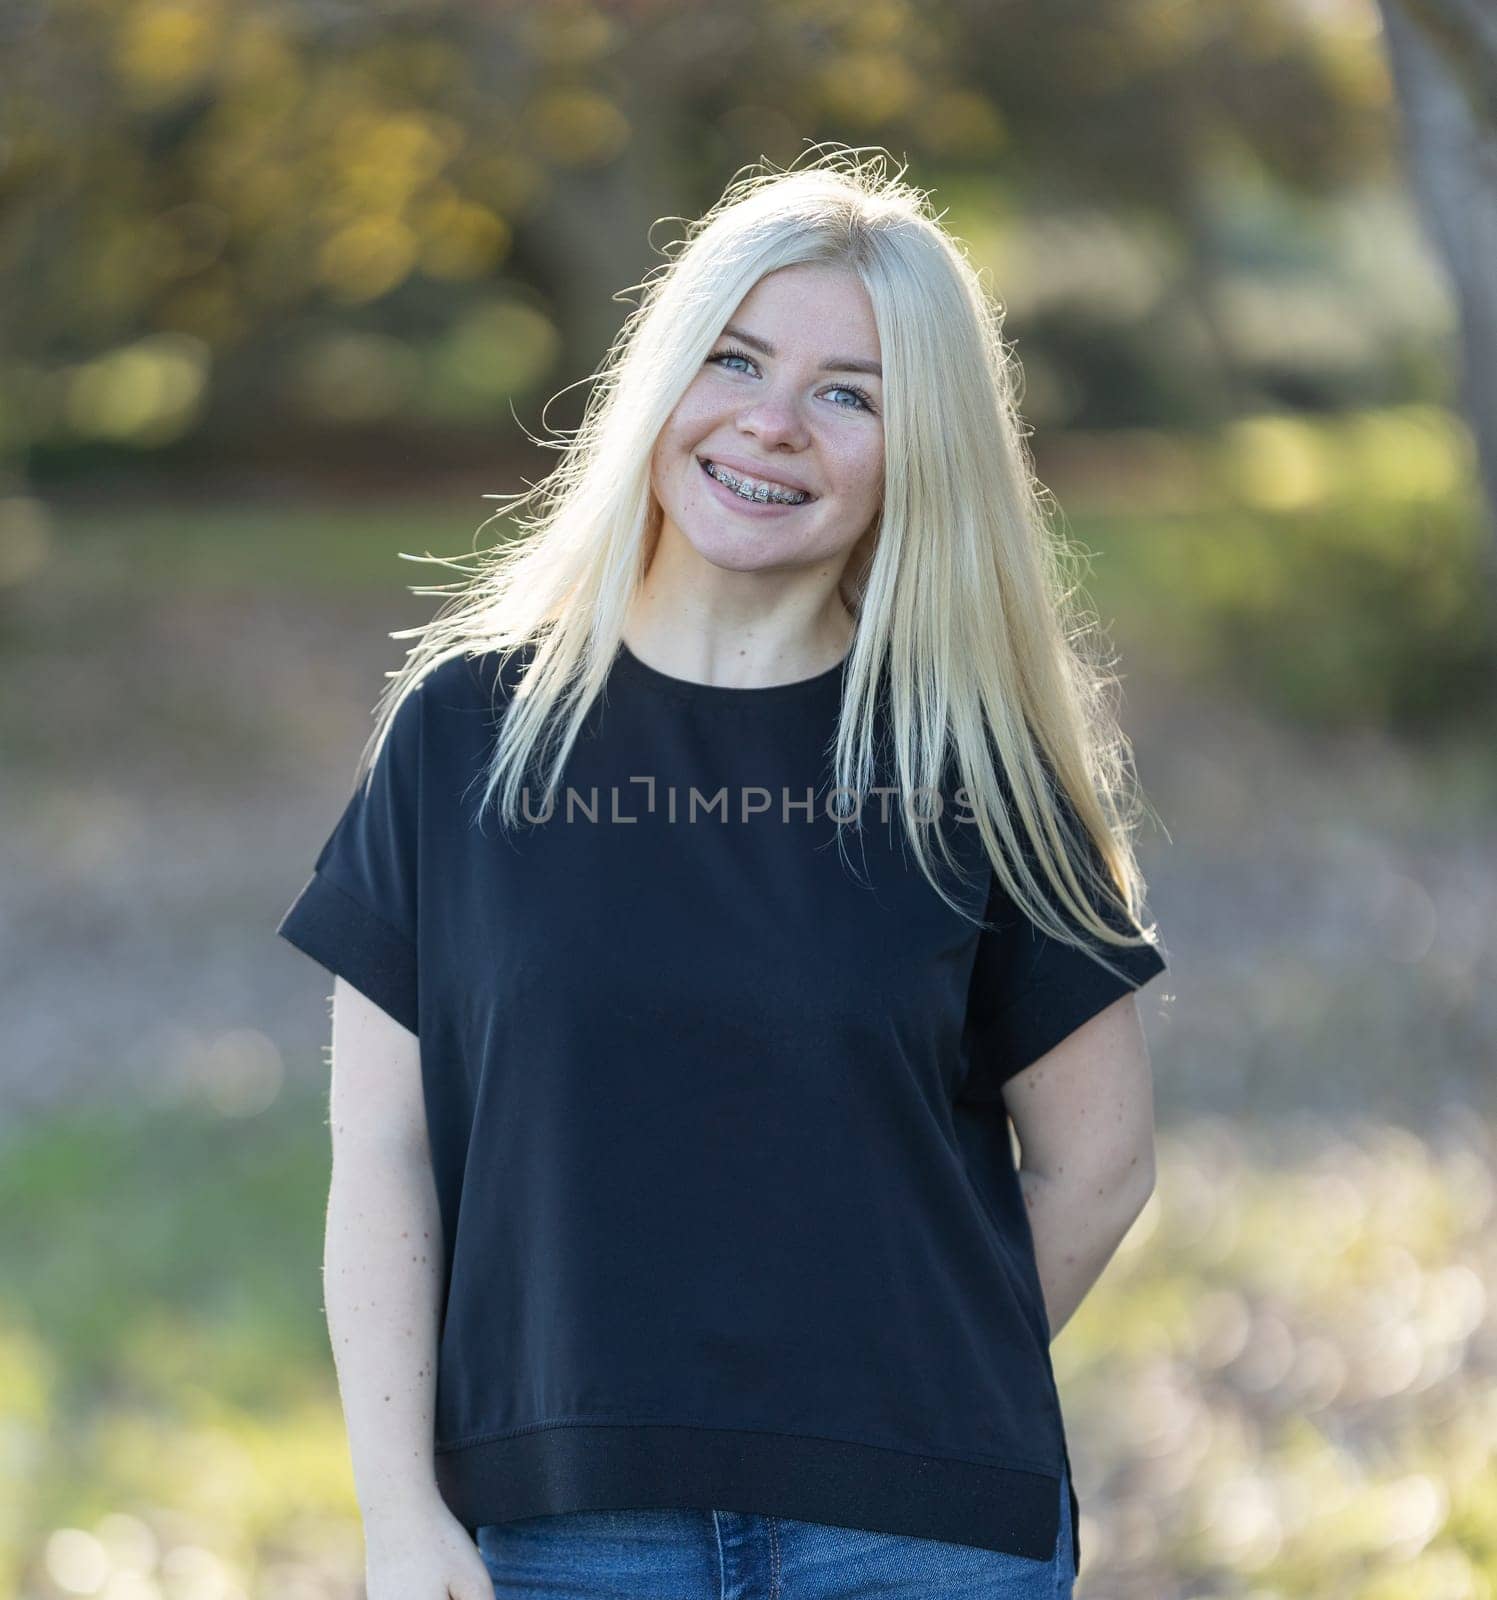 Smiling Woman with braces With Blonde Hair and Black Shirt by Studia72